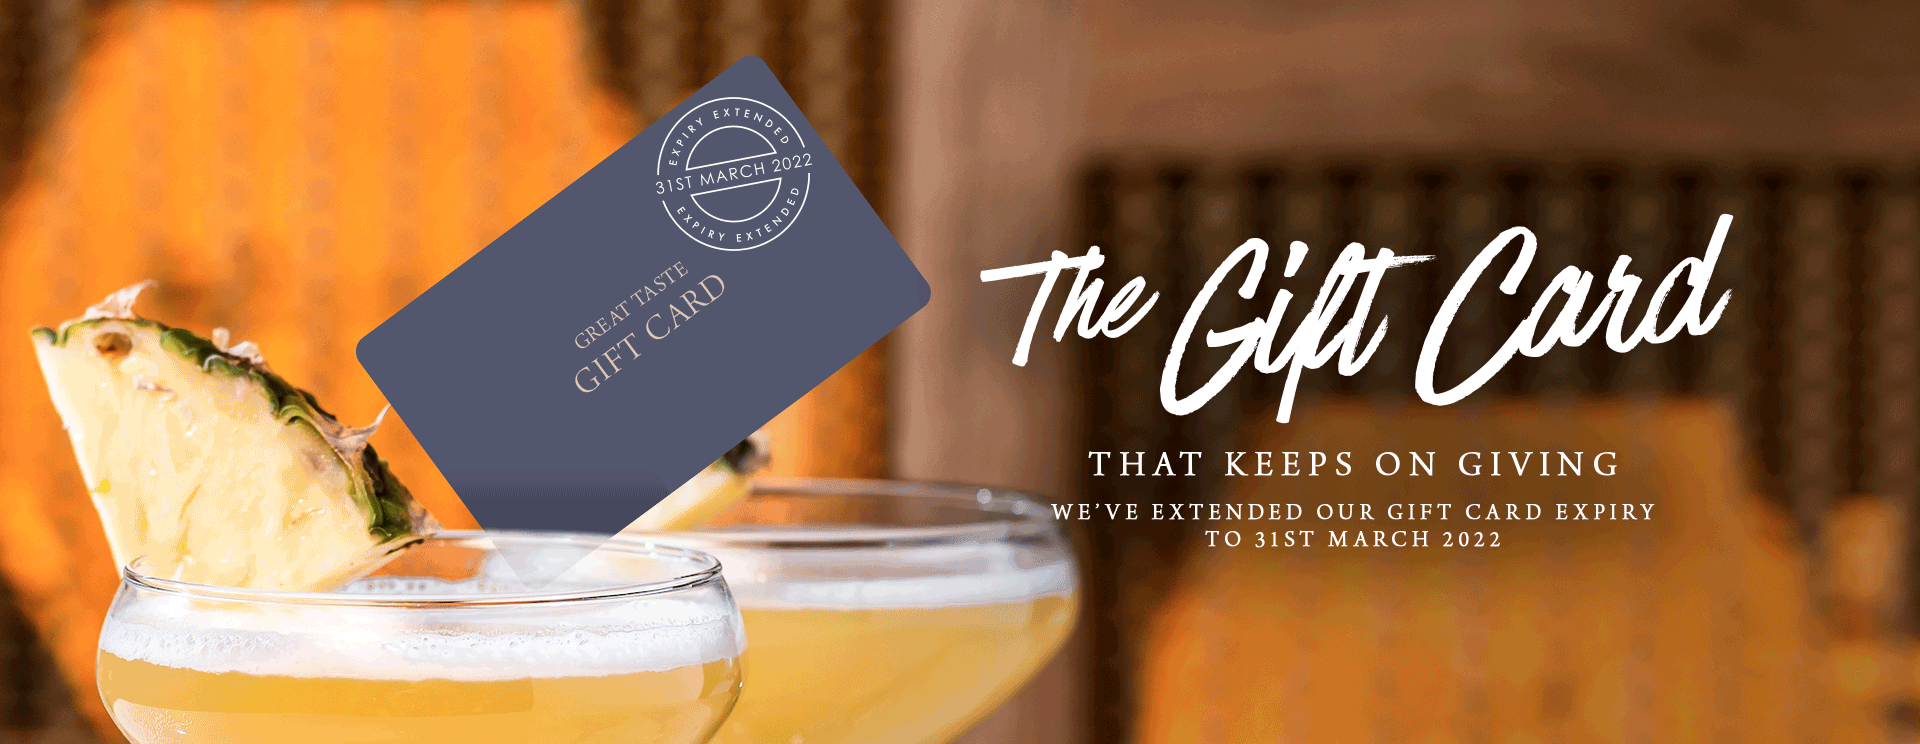 Give the gift of a gift card at The Fishery Inn